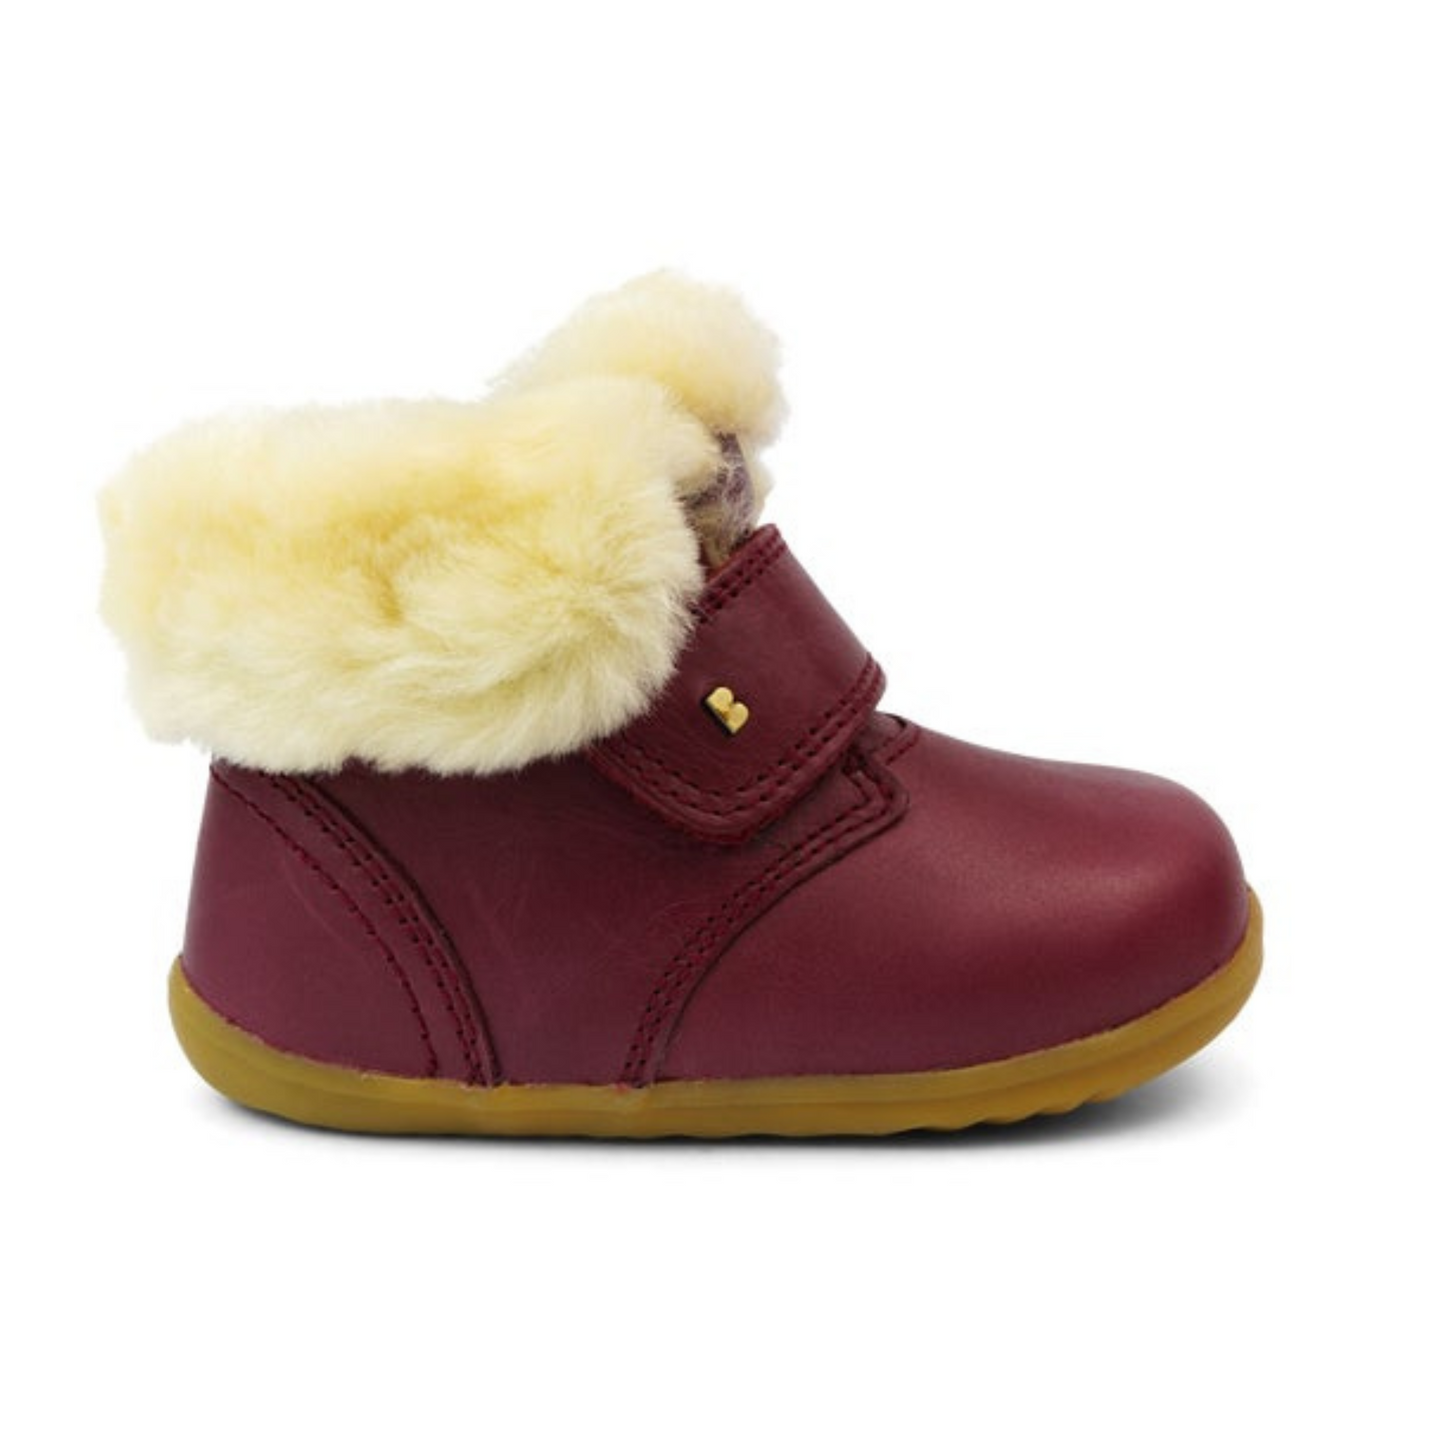 Desert Arctic Lined Boot in Boysenberry Leather SU